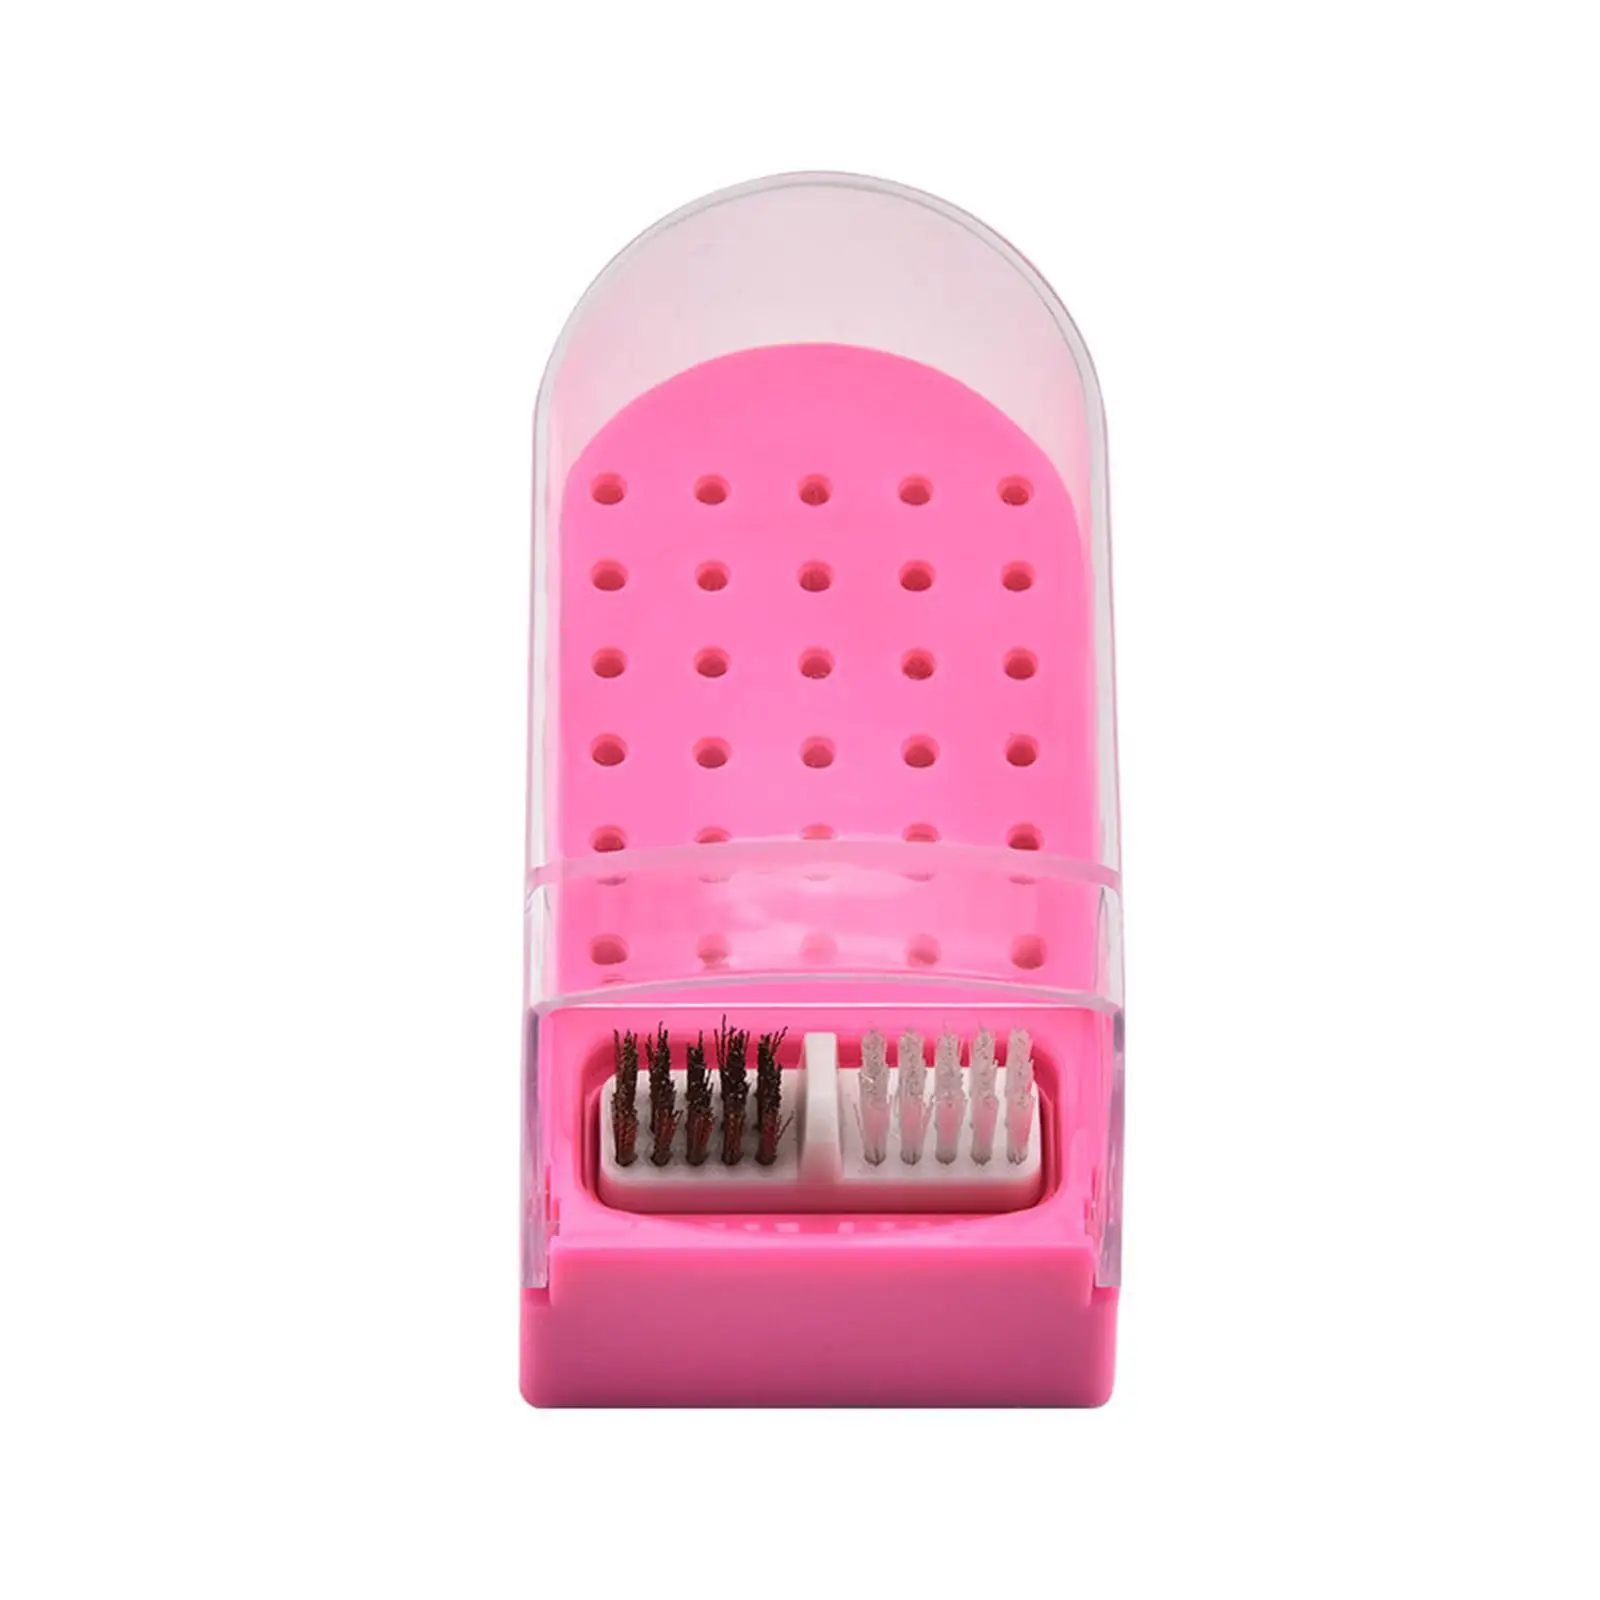 Nail Drill Bit Holder Display Stand Dustproof Lightweight Grinding Case Portable Home Use 30 Holes Stand Case Manicure Tool